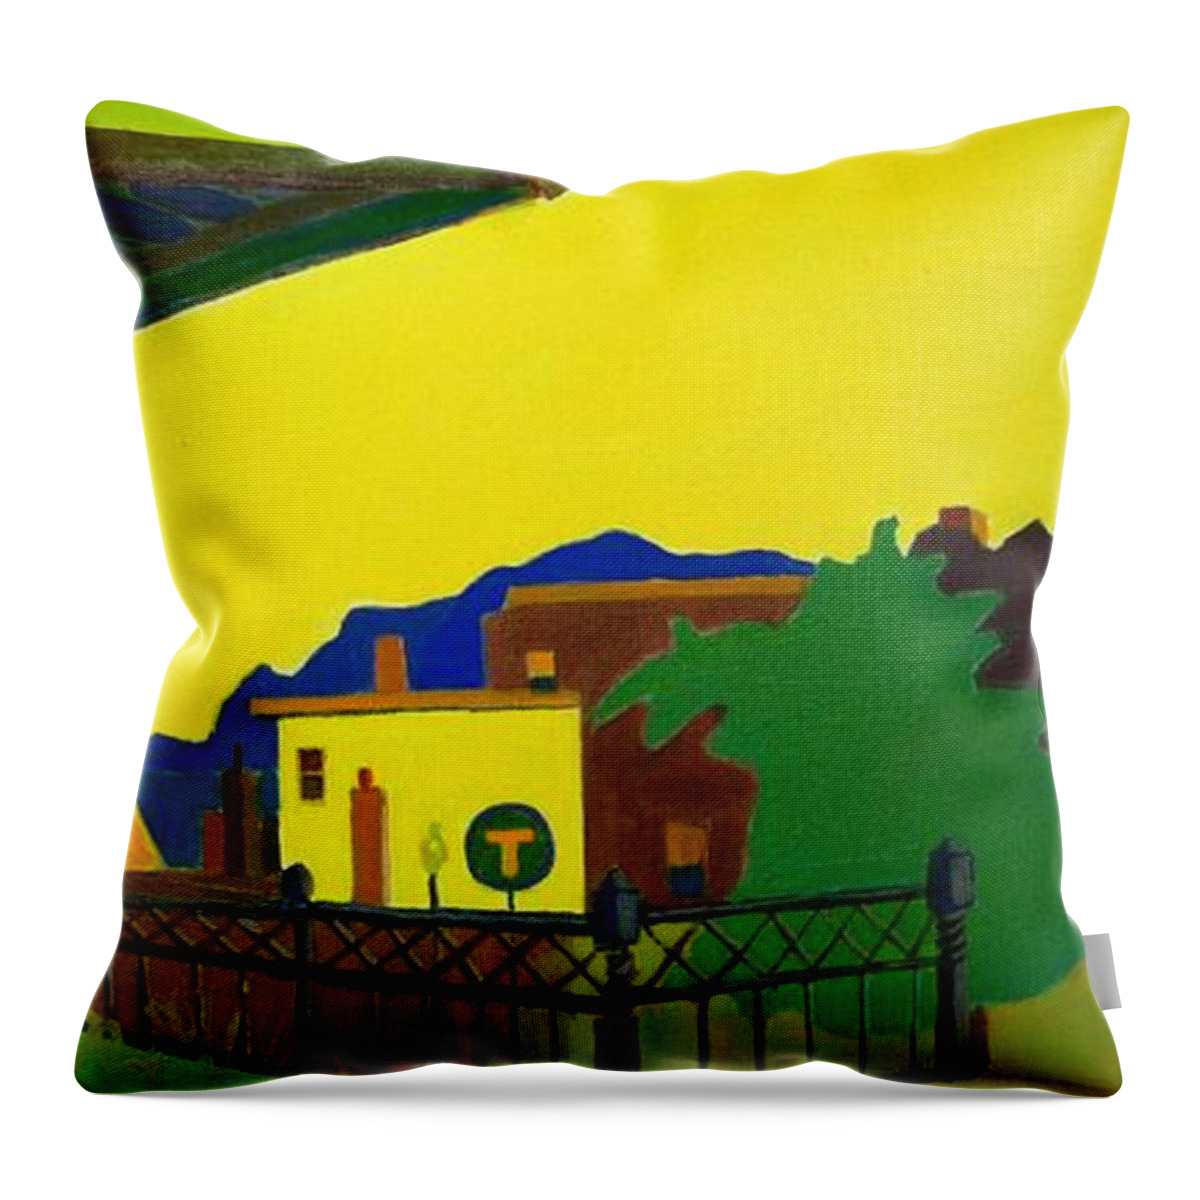 Landscape Throw Pillow featuring the painting Trainstop by Debra Bretton Robinson